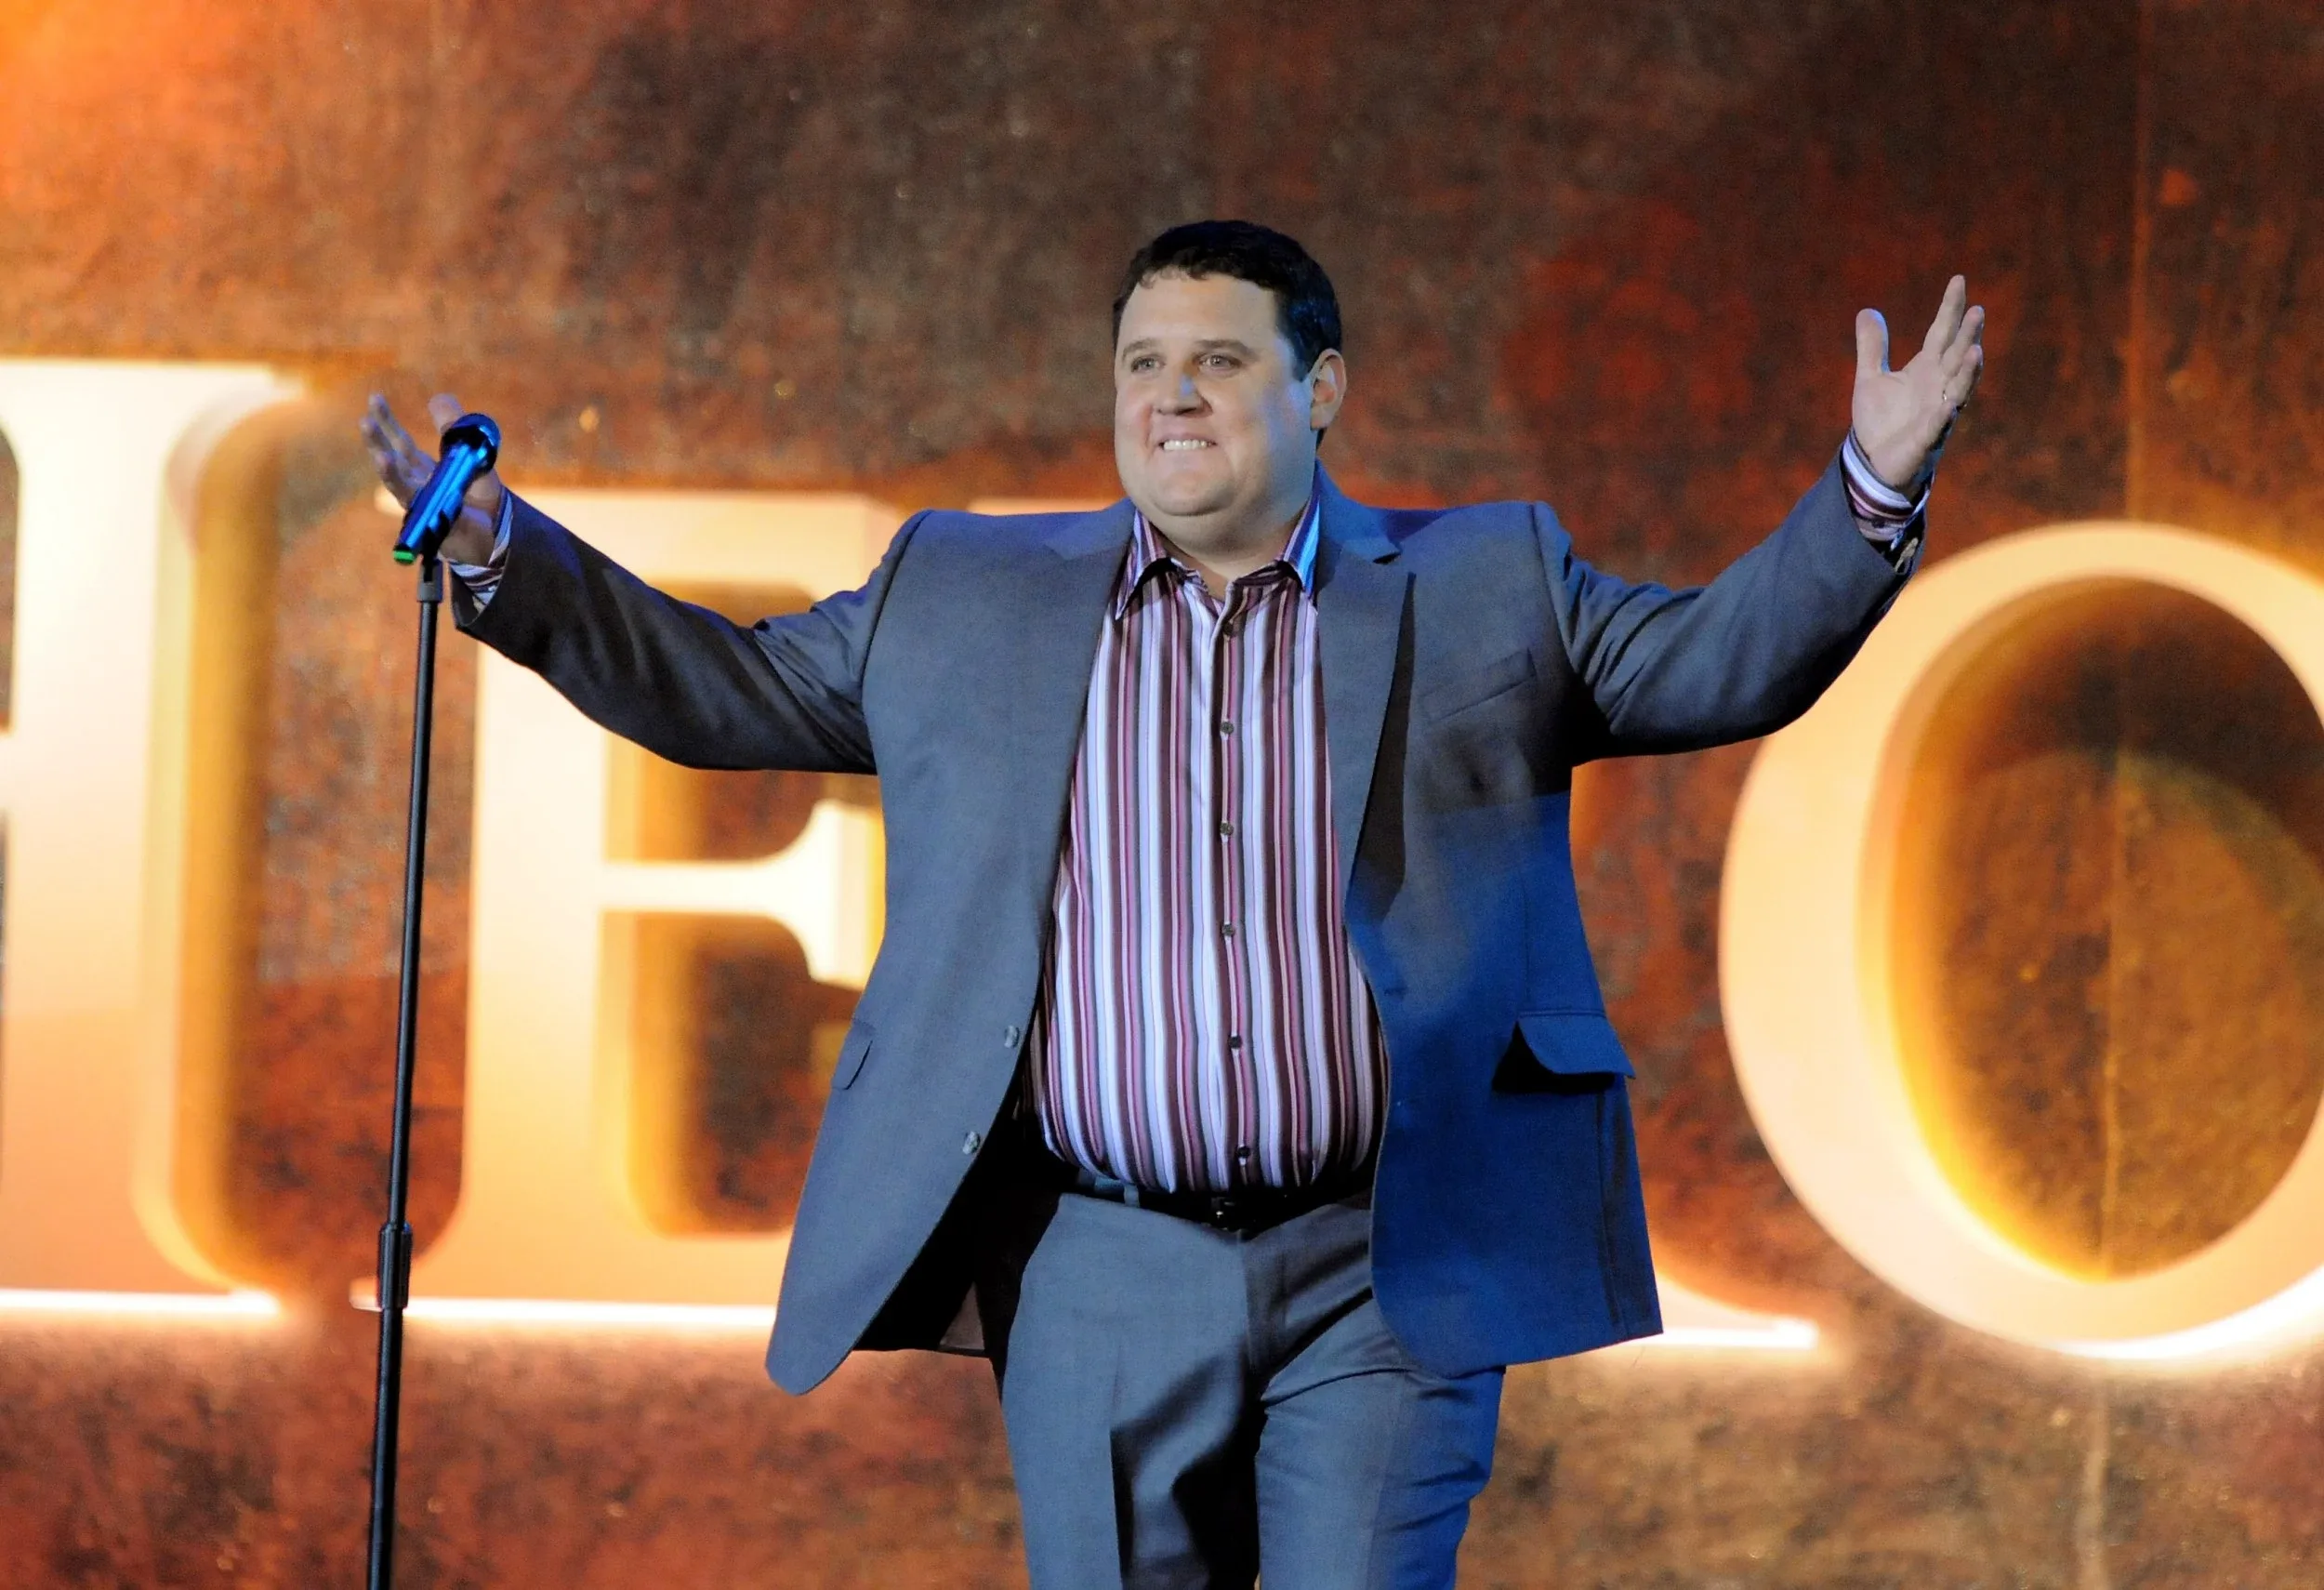 Top 5 Best Peter Kay Jokes & One-Liners Of All Time